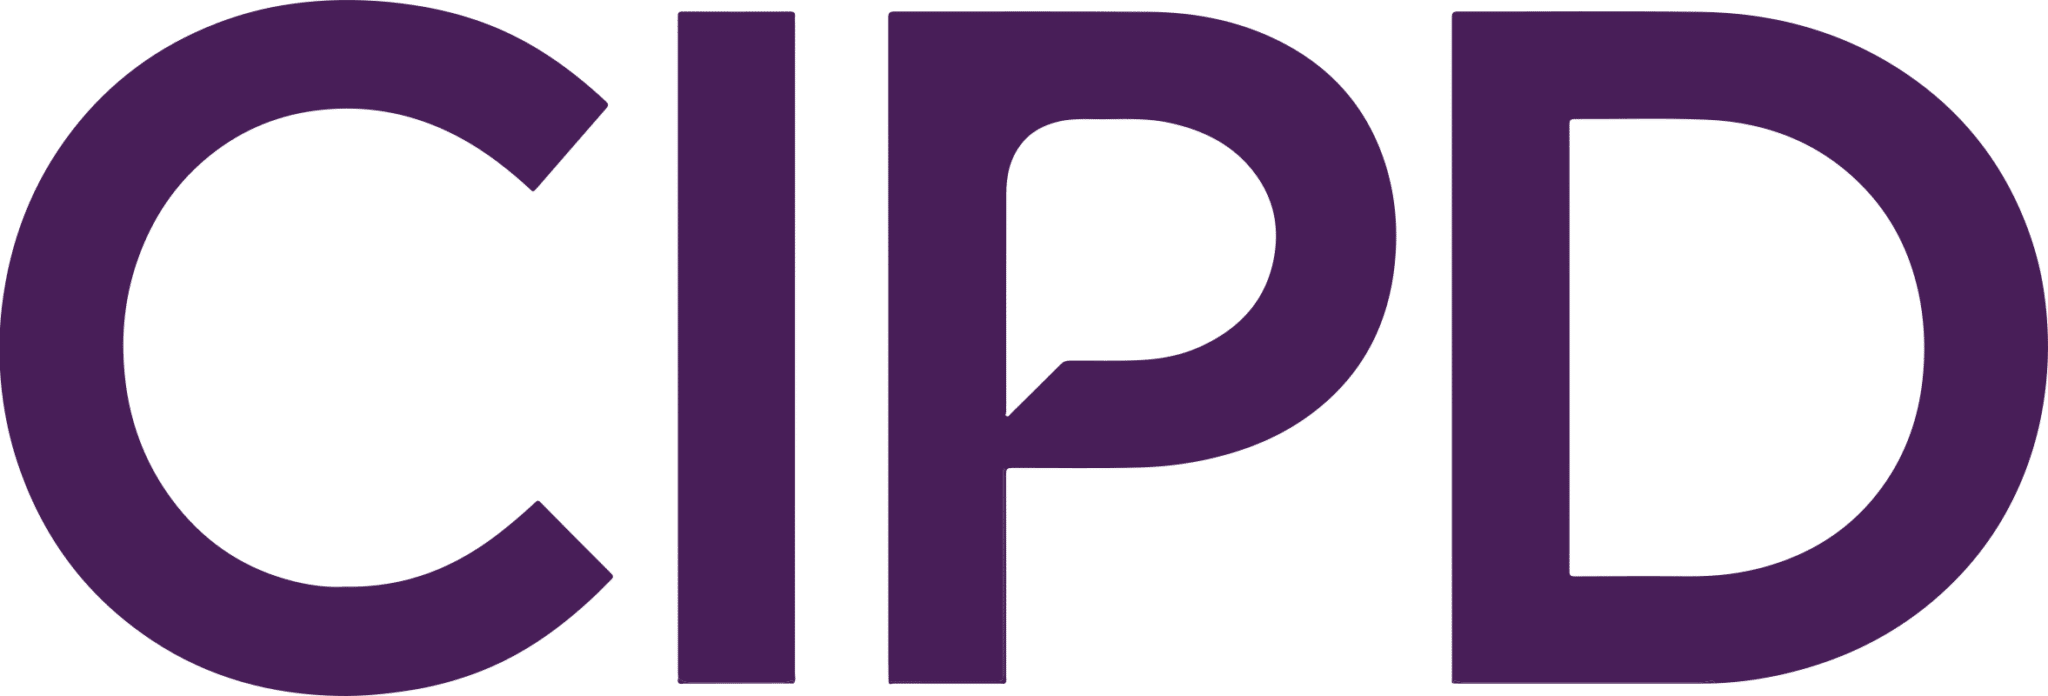 Chartered Institute of Personnel and Development (CIPD) Logo